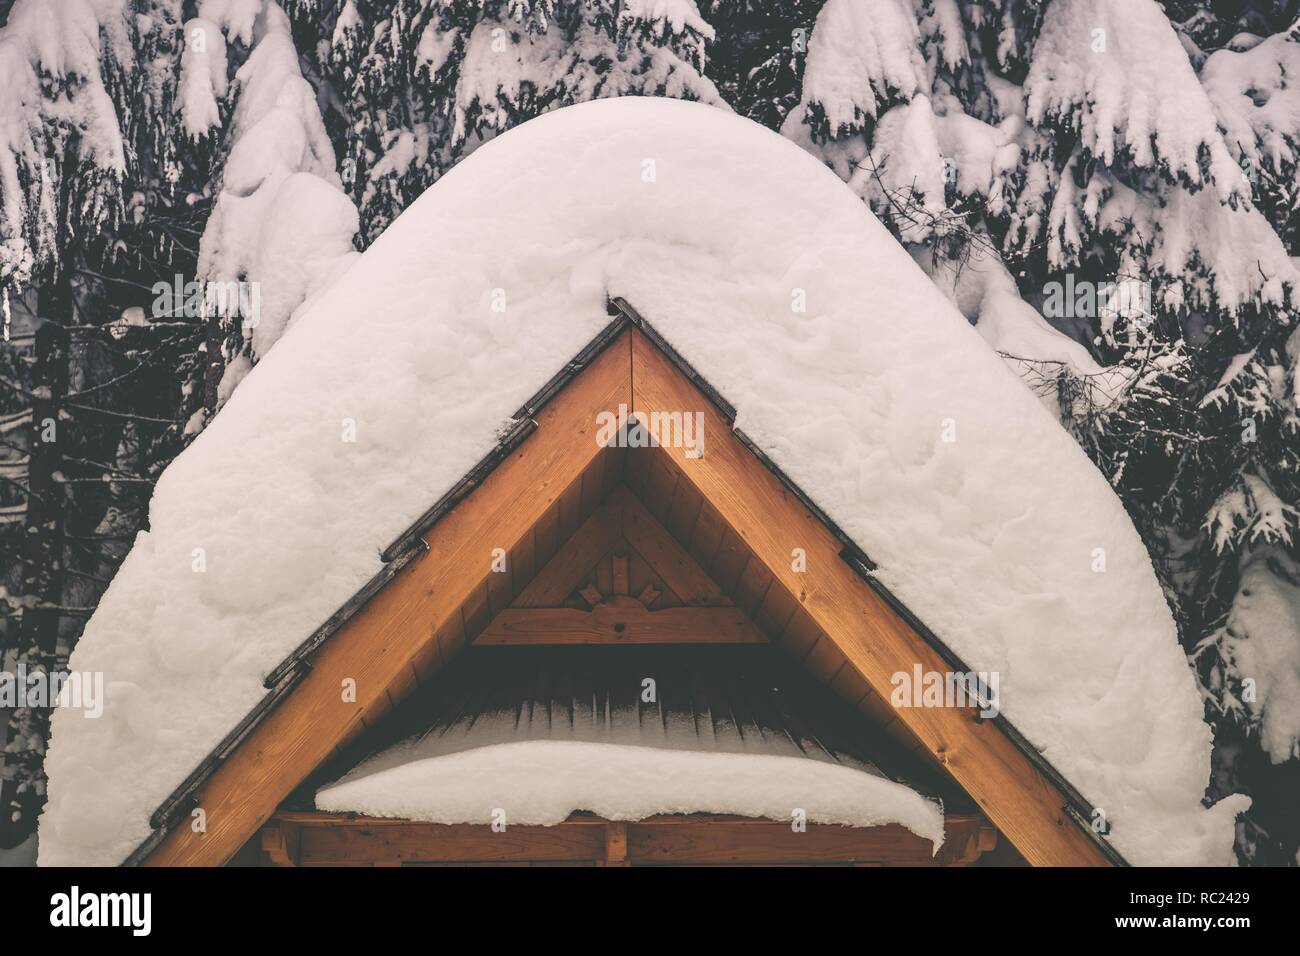 Heavy Snow Weather Concept. Wooden Architectural Element Covered by Heavy Snow. Stock Photo